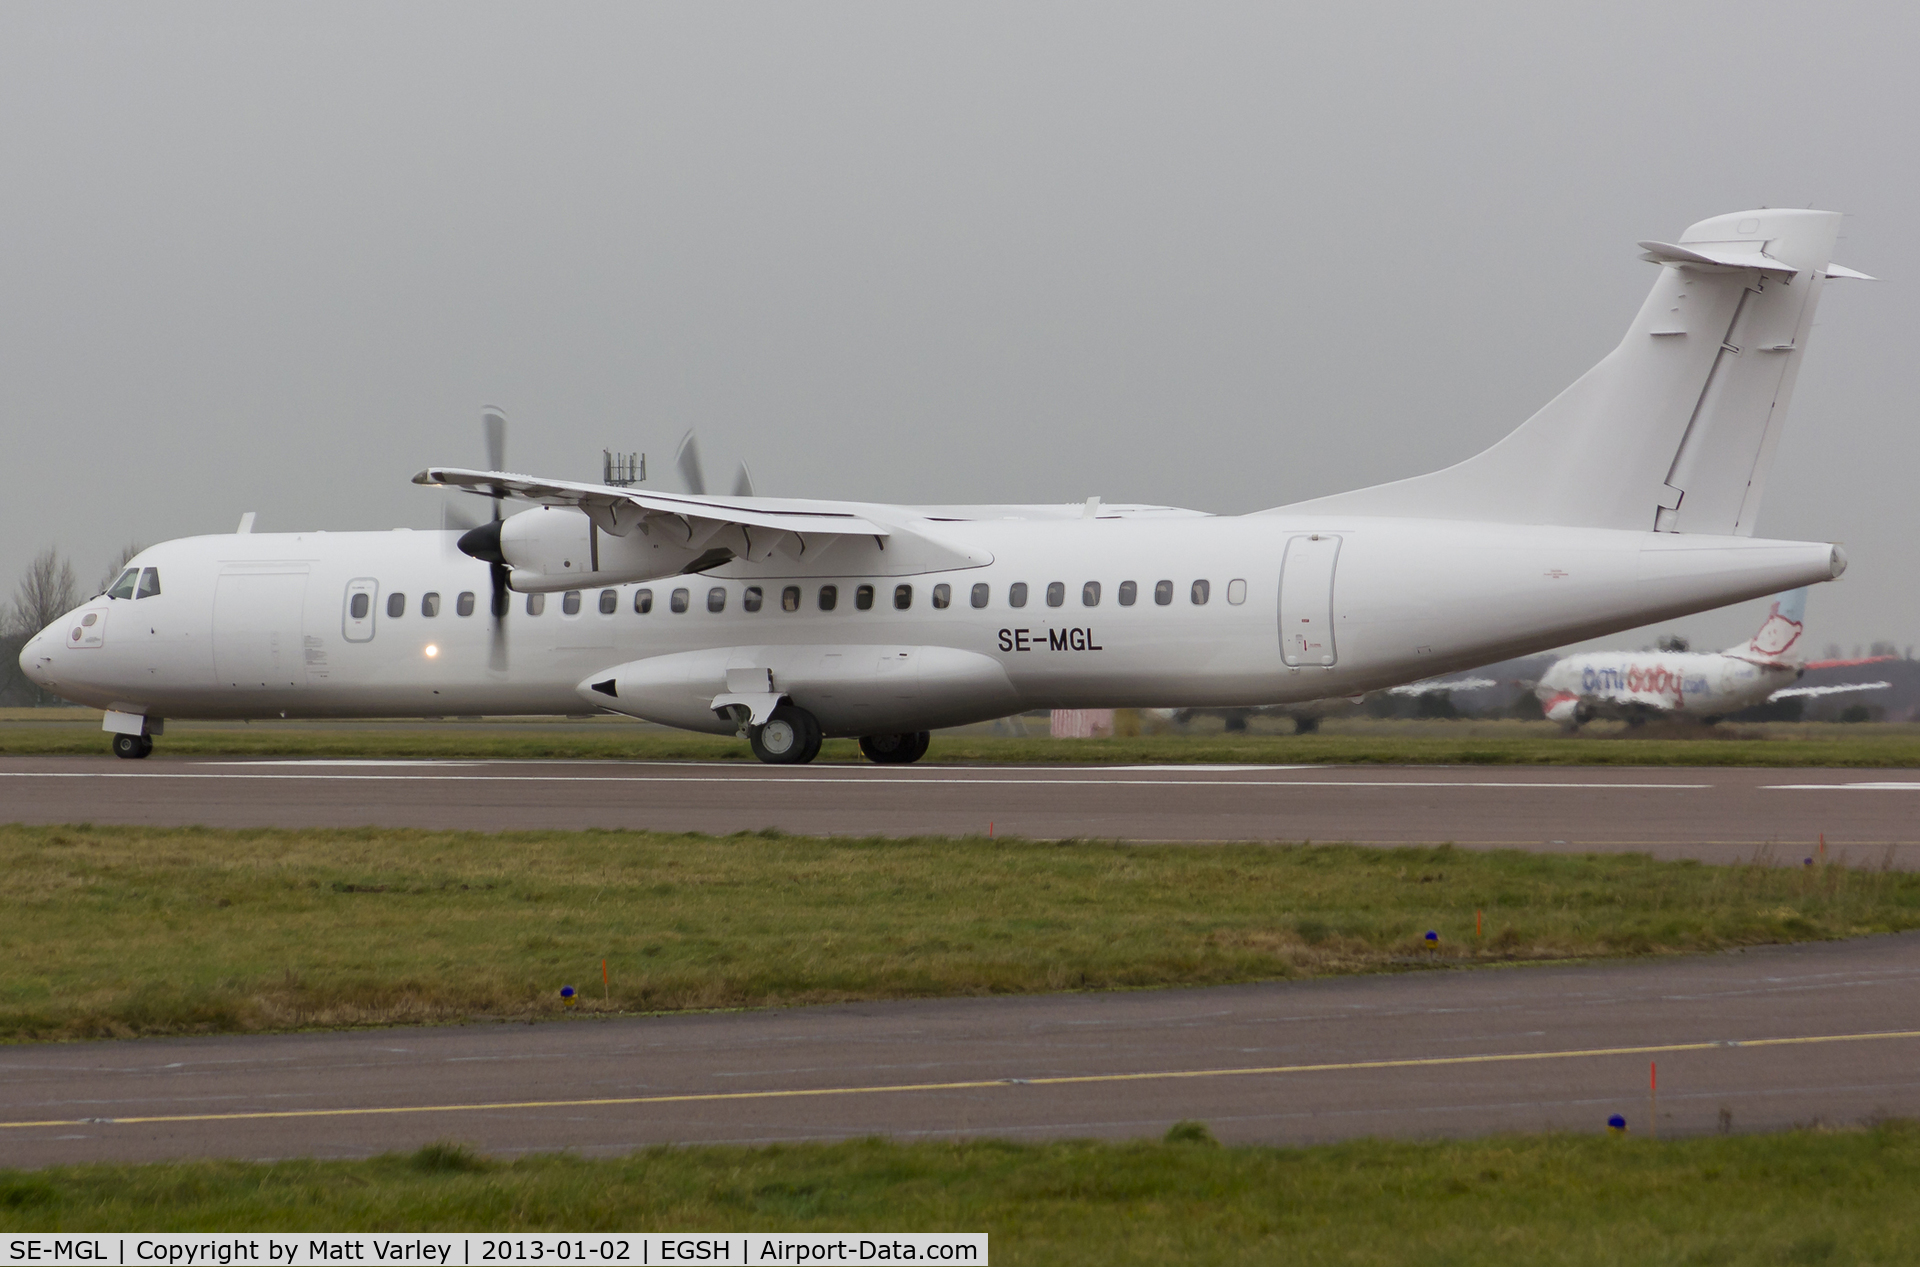 SE-MGL, 1993 ATR 72-202 C/N 353, Departing EGSH after spray by Air Livery.